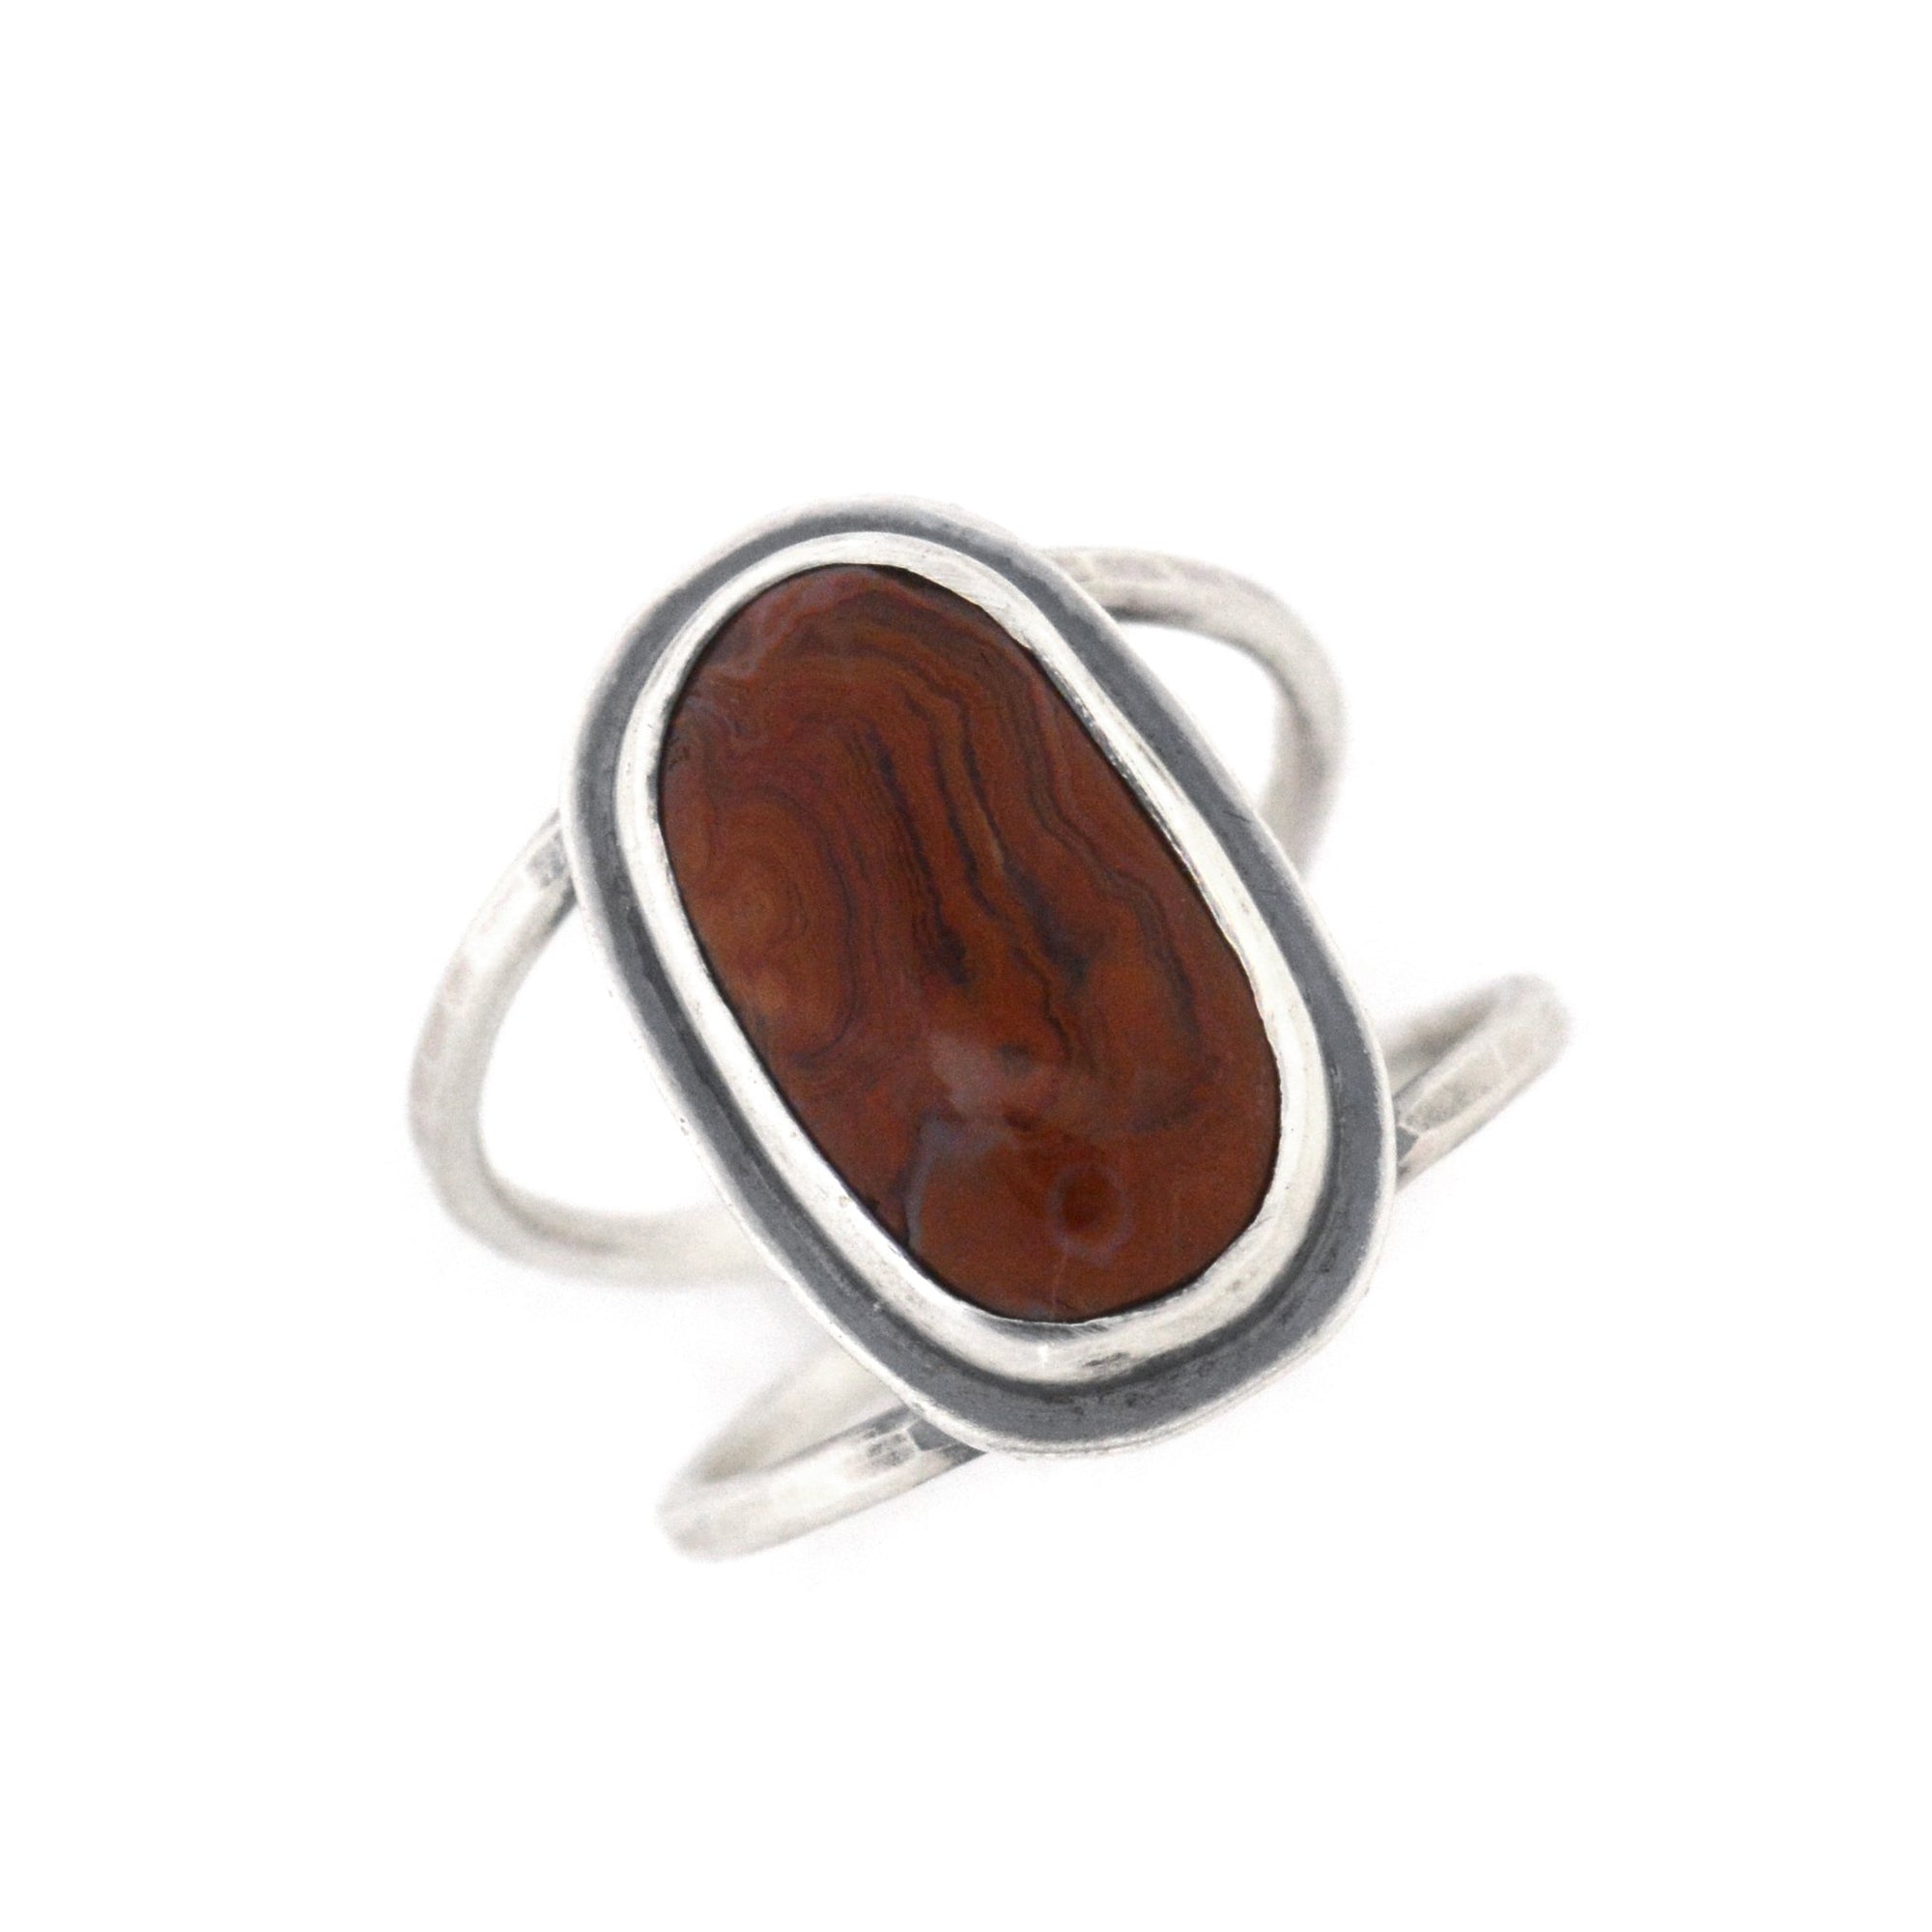 Marquette Lake Superior Agate Ring - Size 8.75, Ring handmade by Beth ...